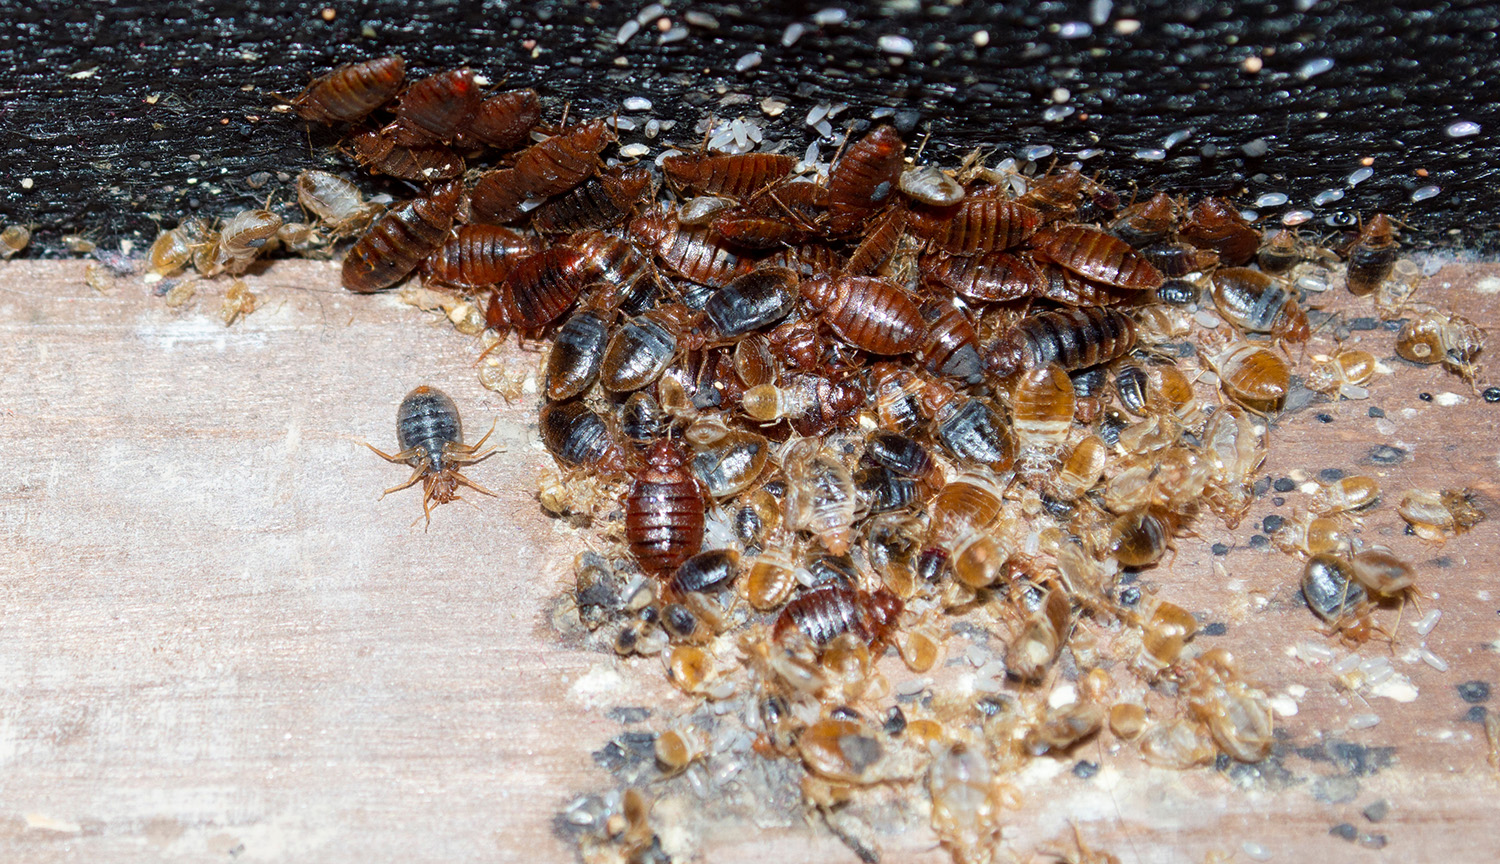 Photograph shows many dark brown bed bugs clustered together.